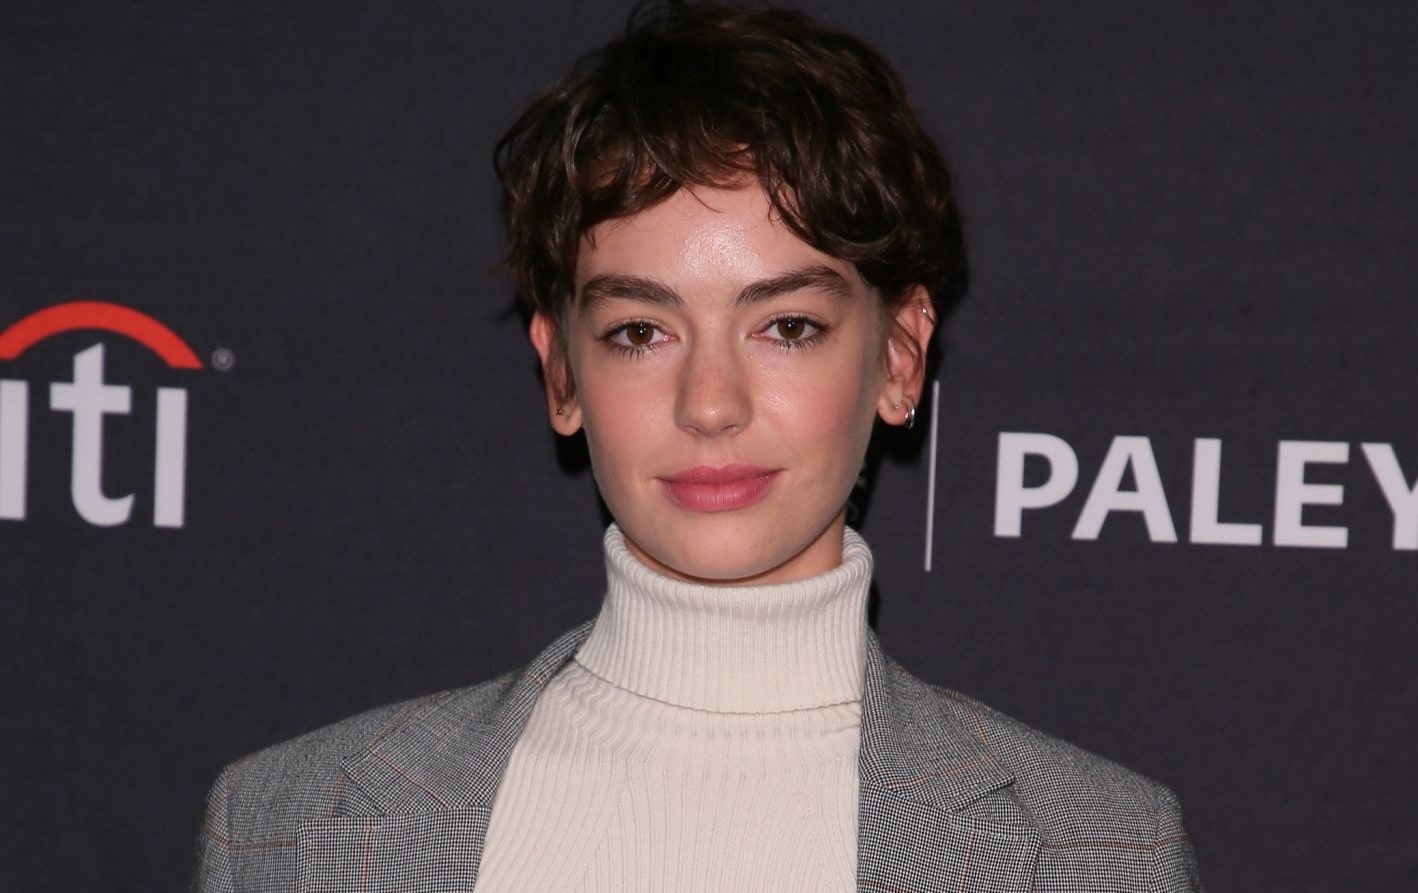 Brigette lundy-paine hot